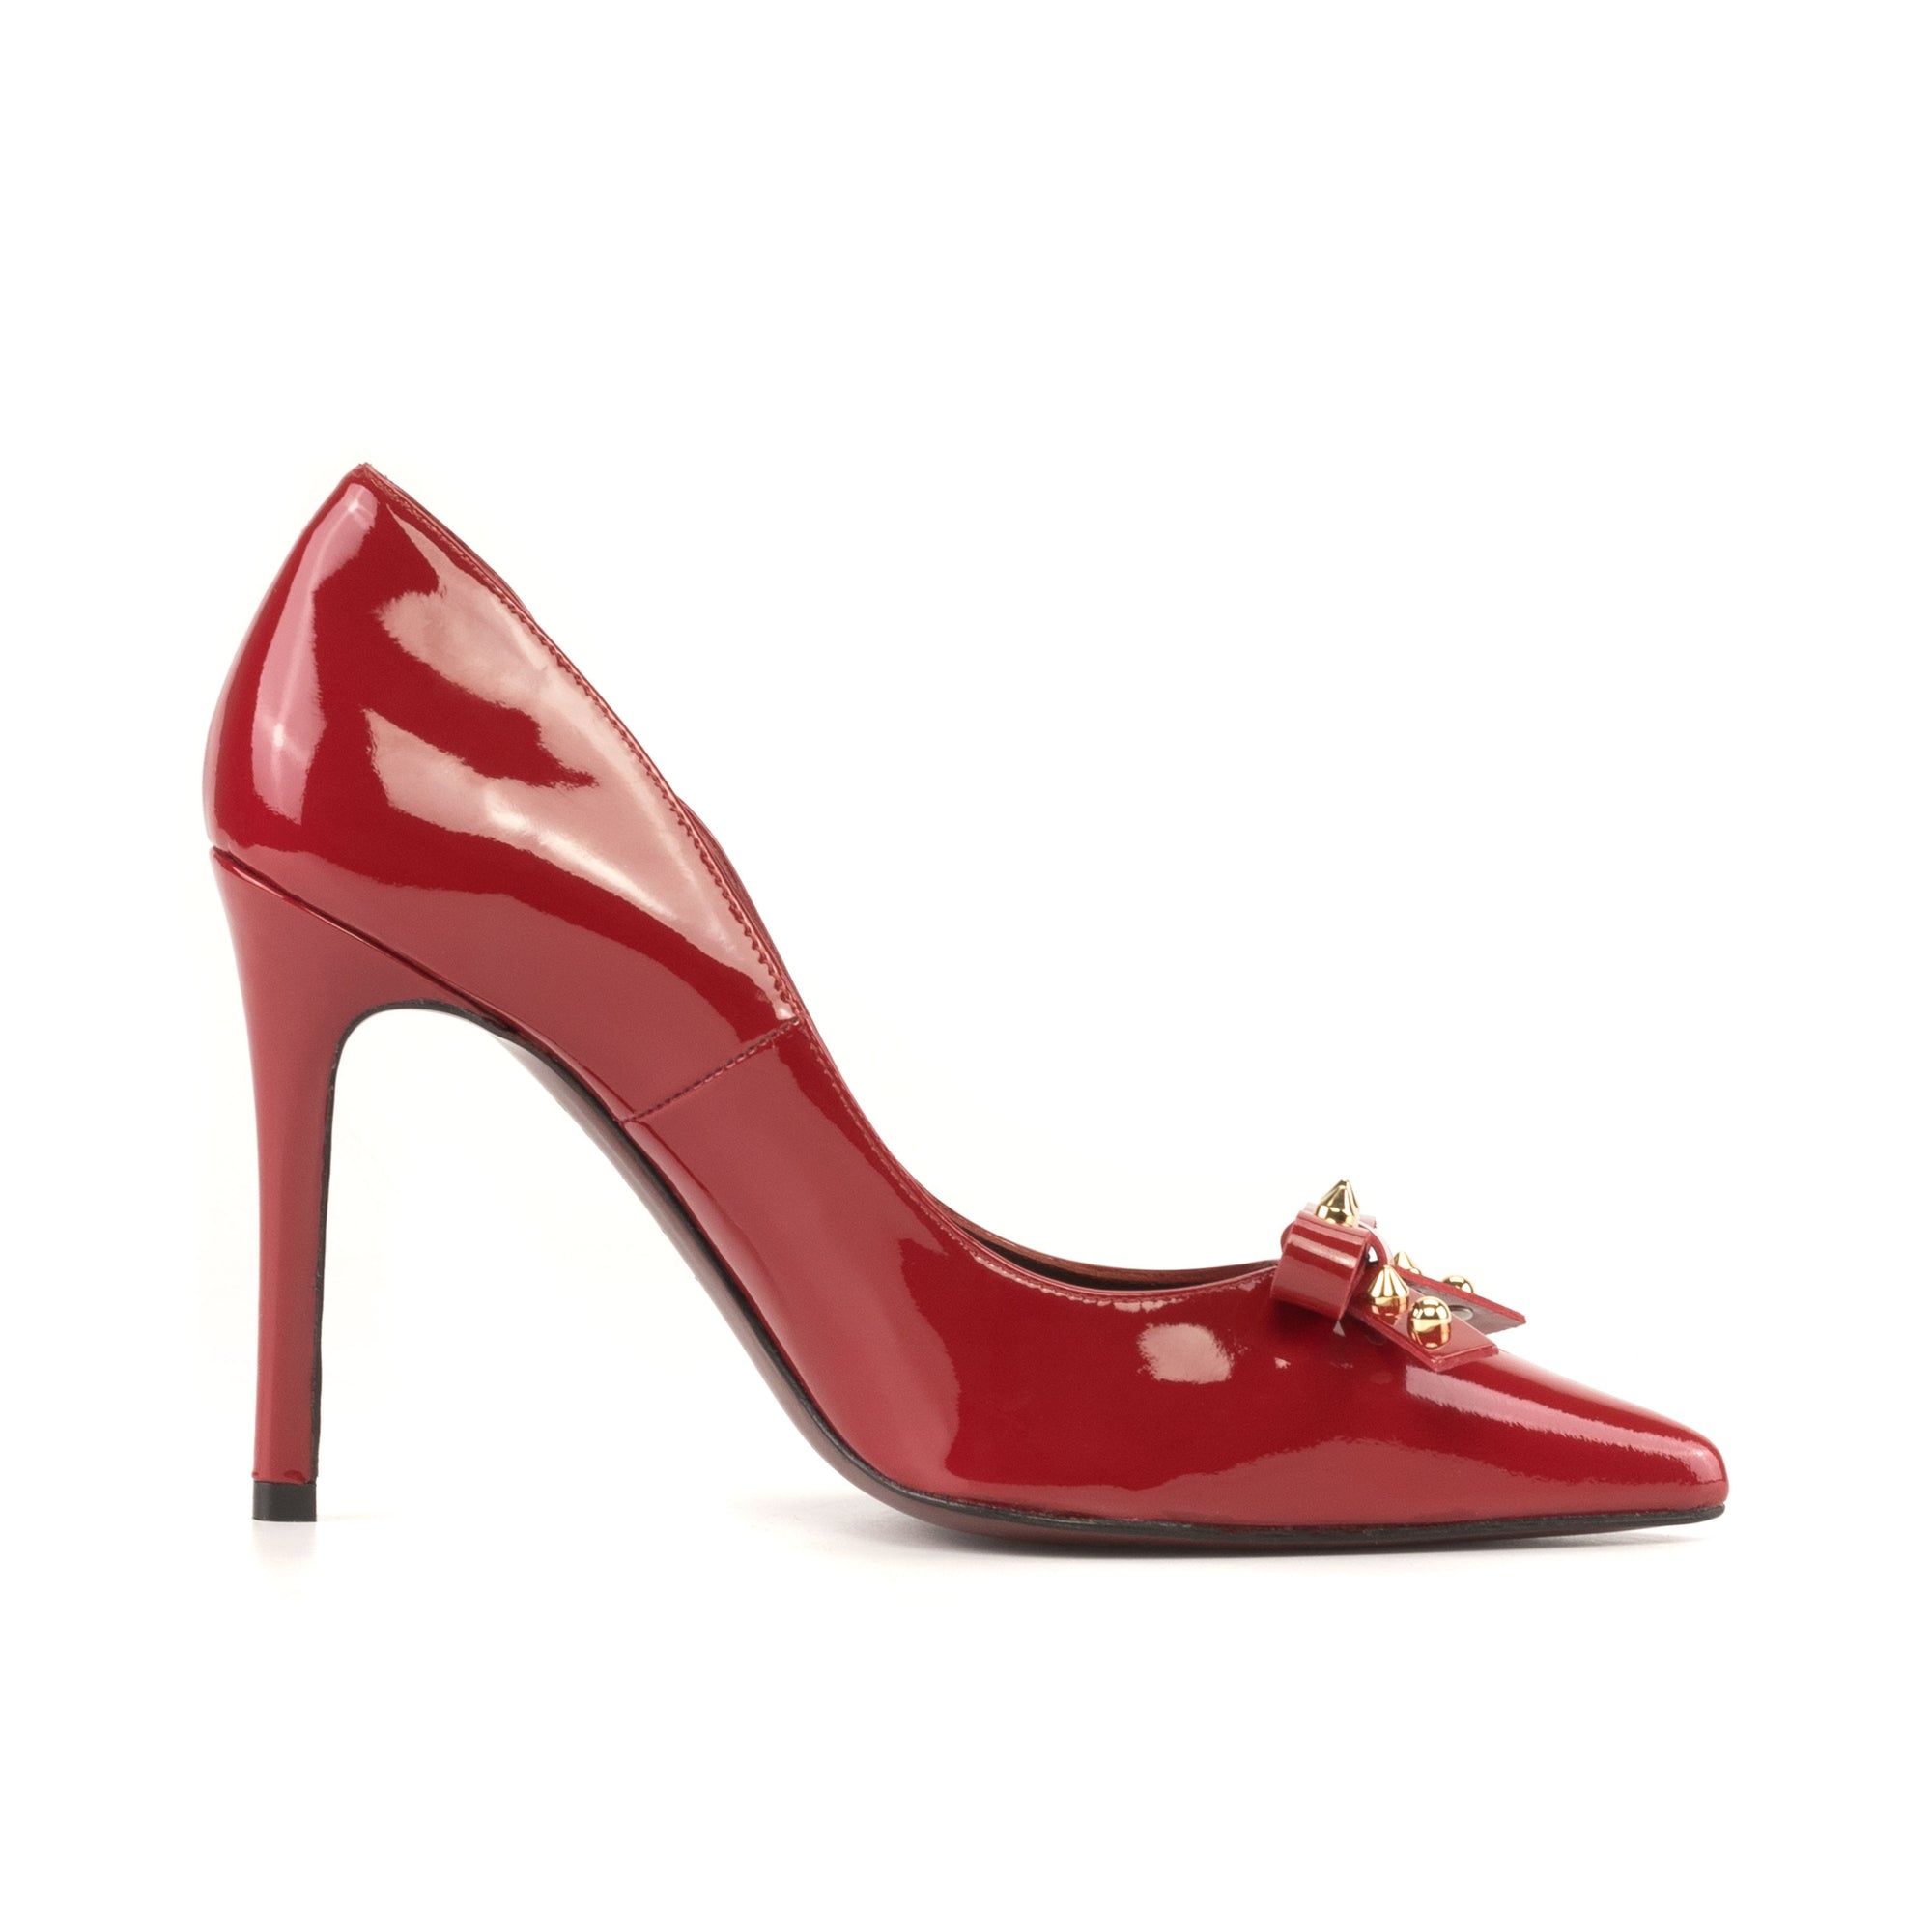 Handcrafted Spanish Passion Red High Heels - Crafted With Love and Perfection